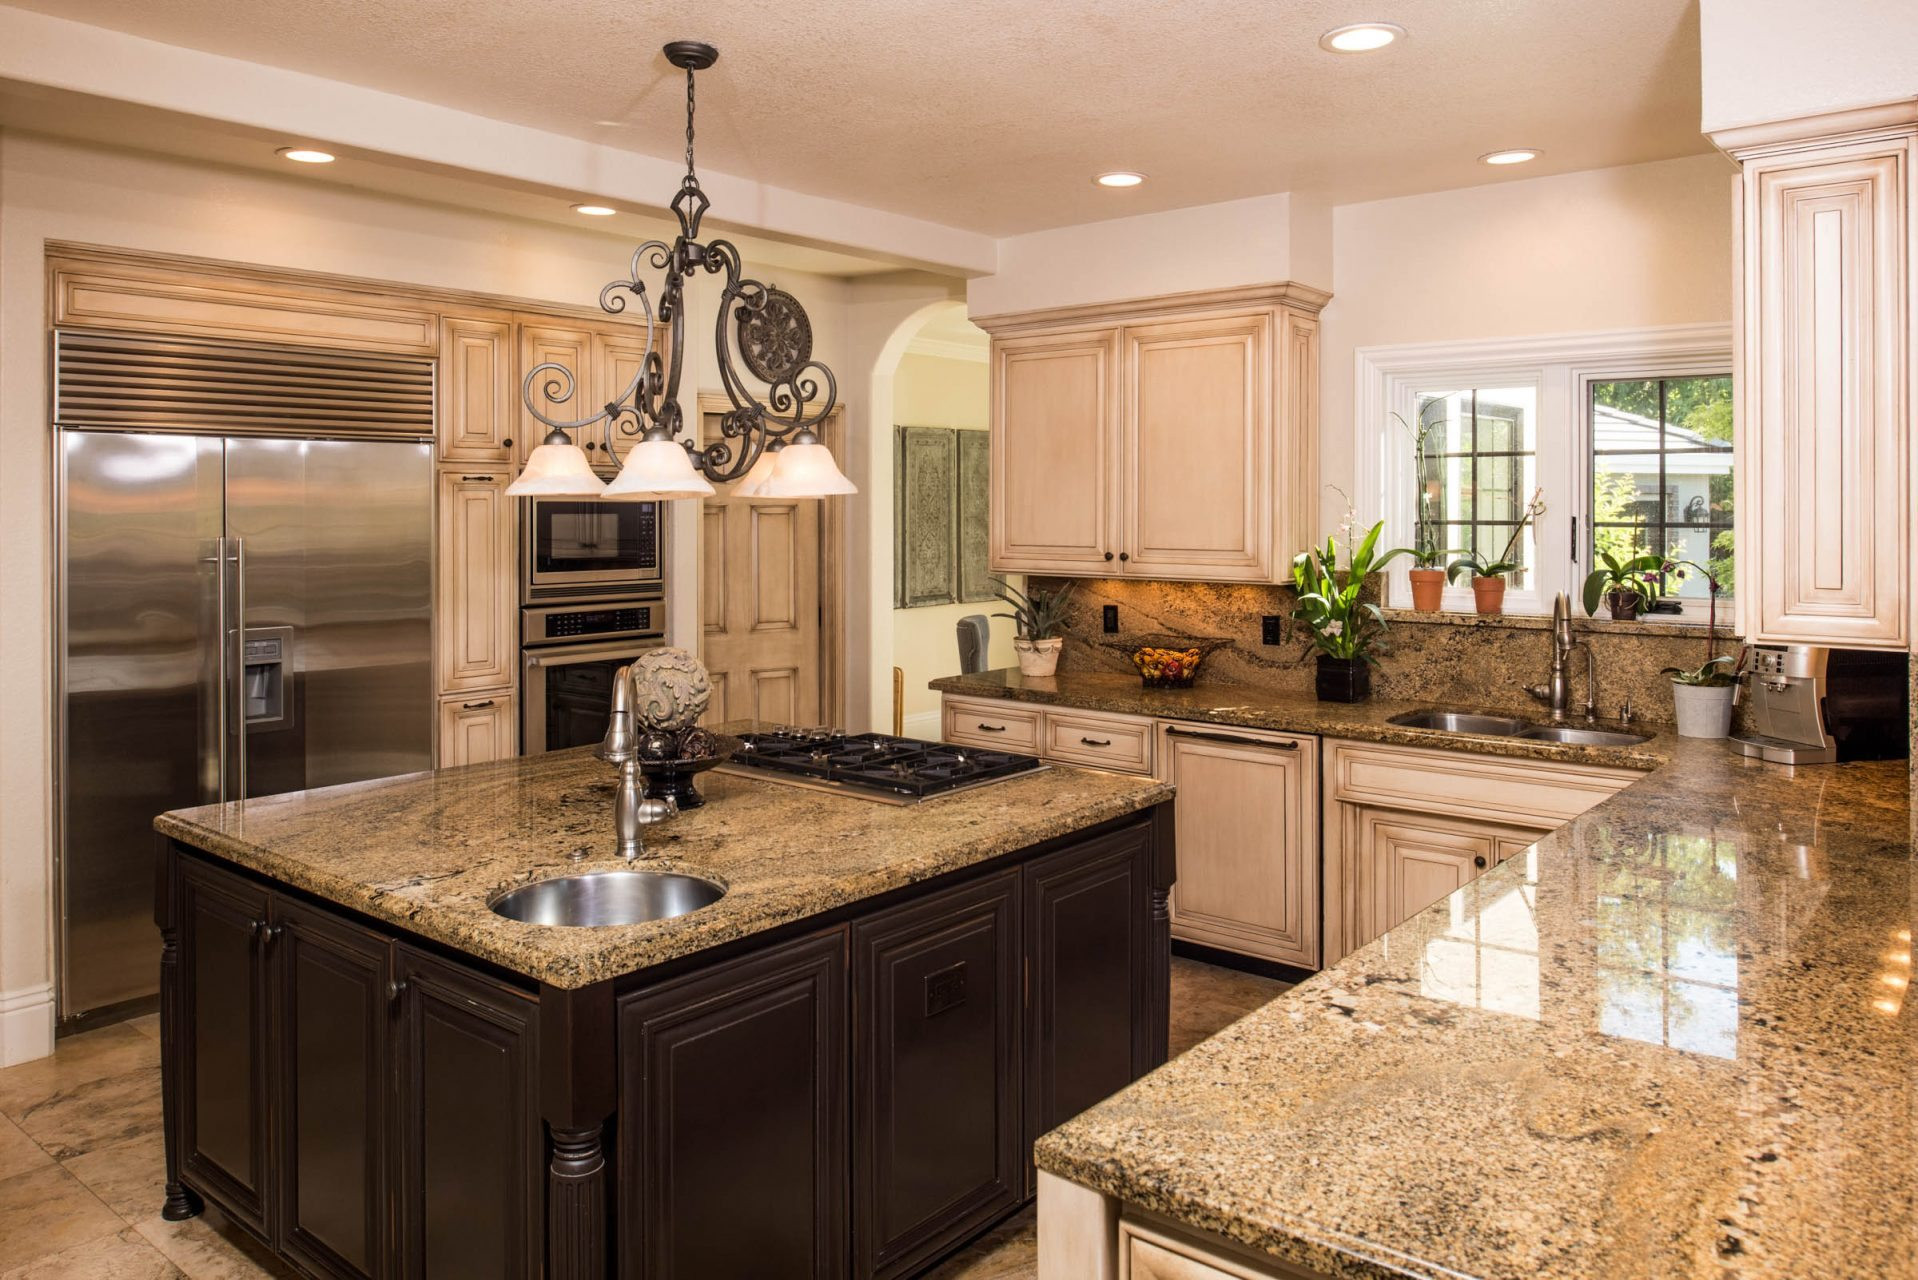 Kitchen Remodeling Photos
 Building Pros Home Remodeling Experts in Danville CA